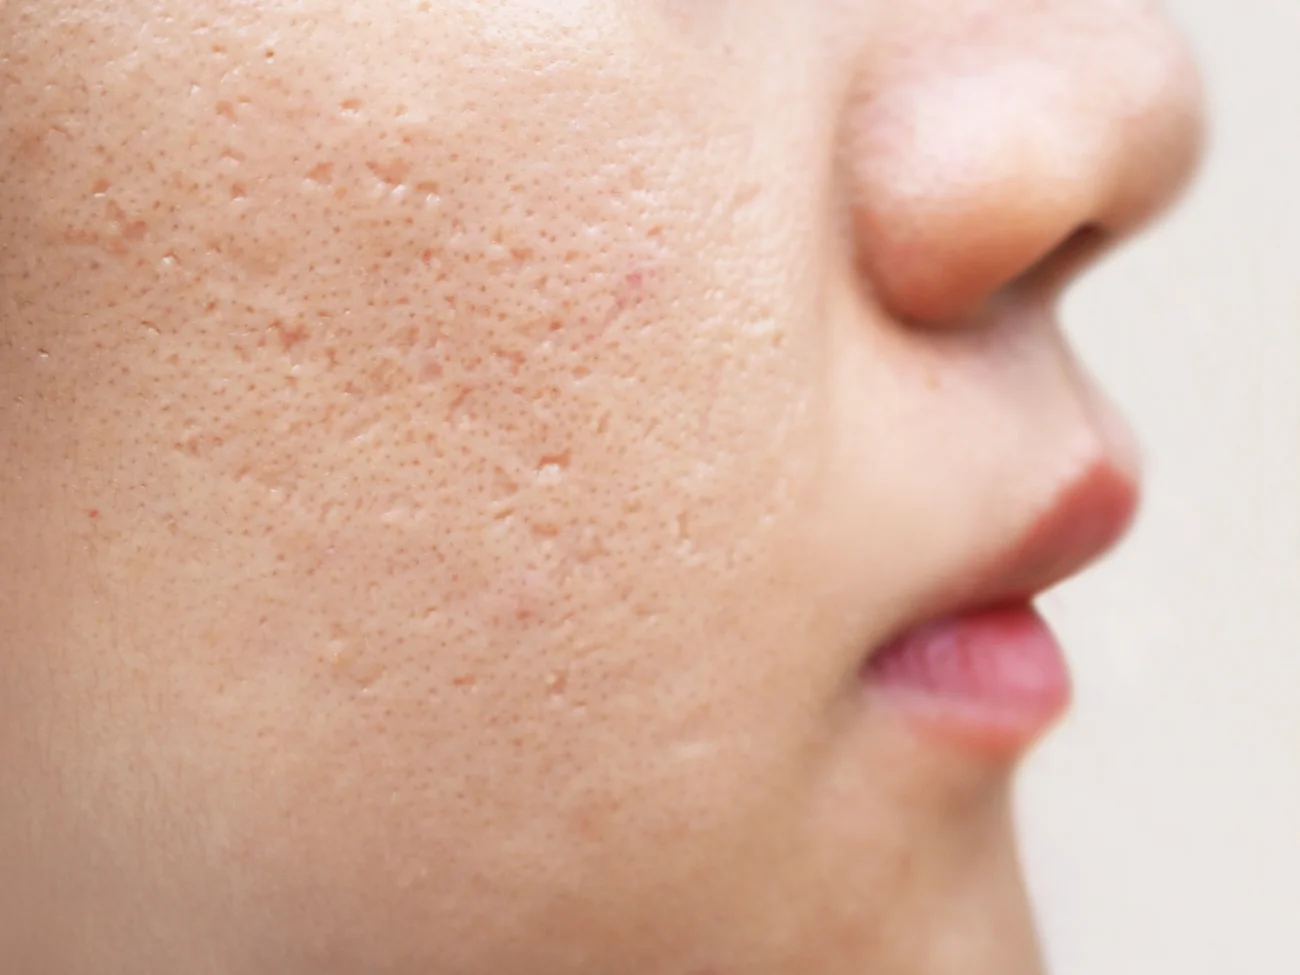 icepick scars acne on cheek on face women cause of happen because of skin loses collagen